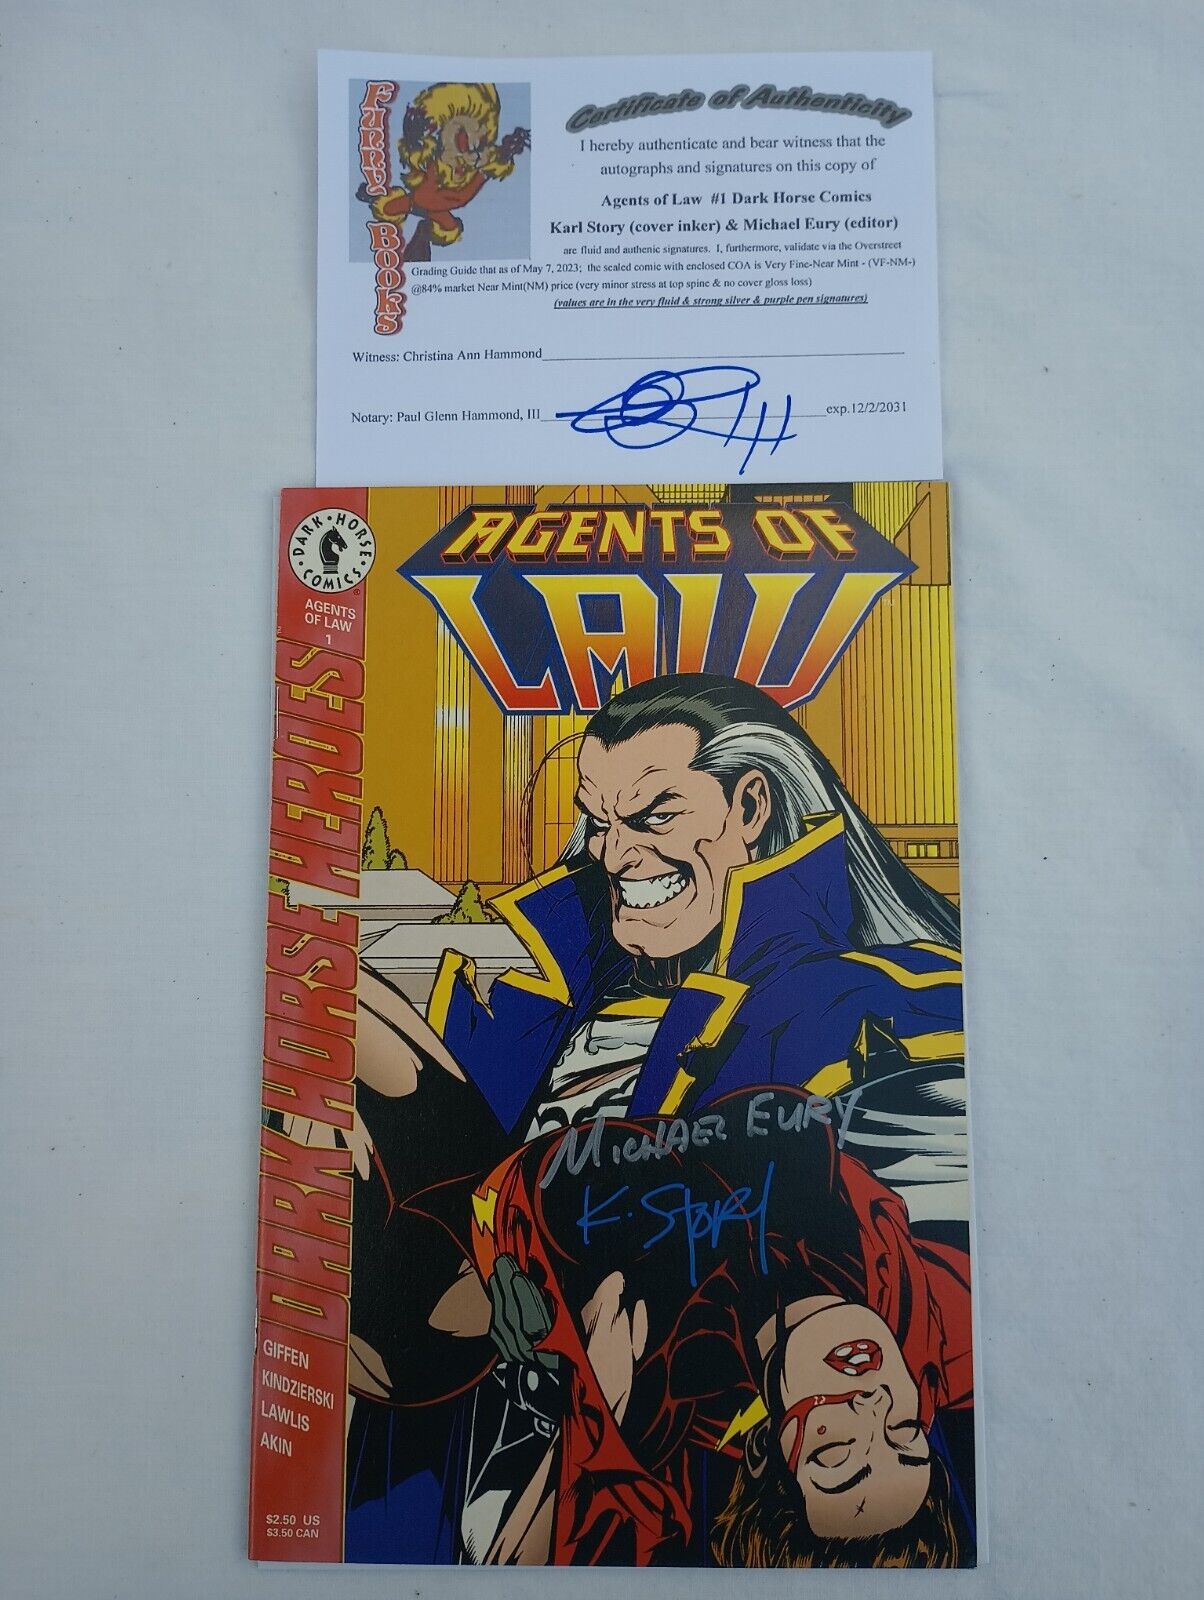 Agents of Law #1 Dark Horse Comics autographed by Michael Eury and Karl Story